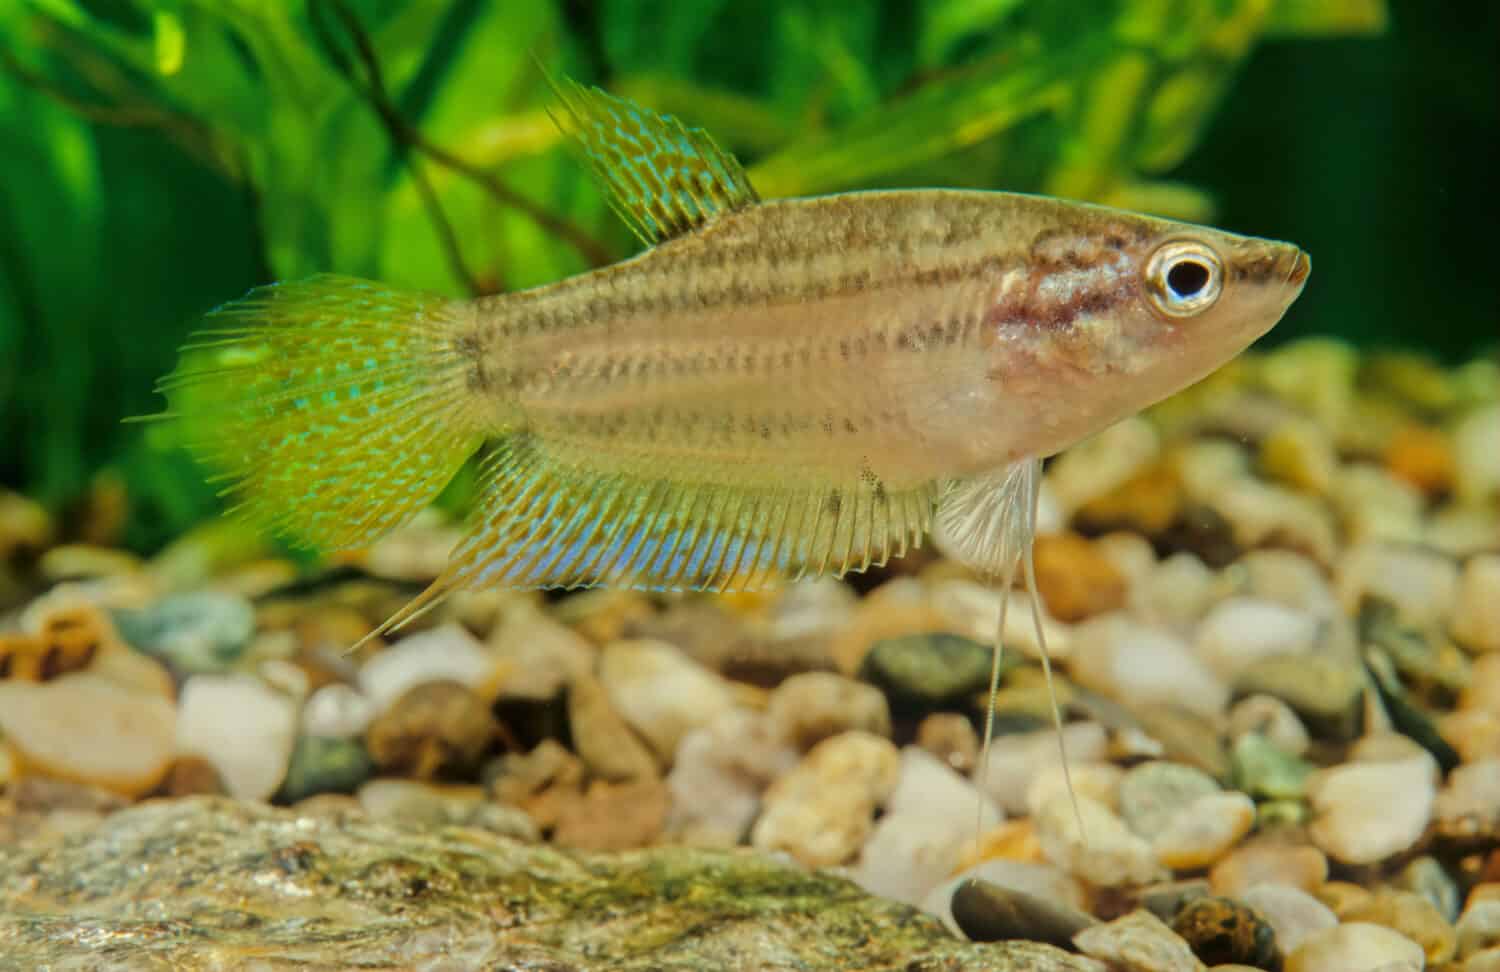 The croaking gourami (Trichopsis vittata) is a species of small freshwater labyrinth fish of the gourami family.